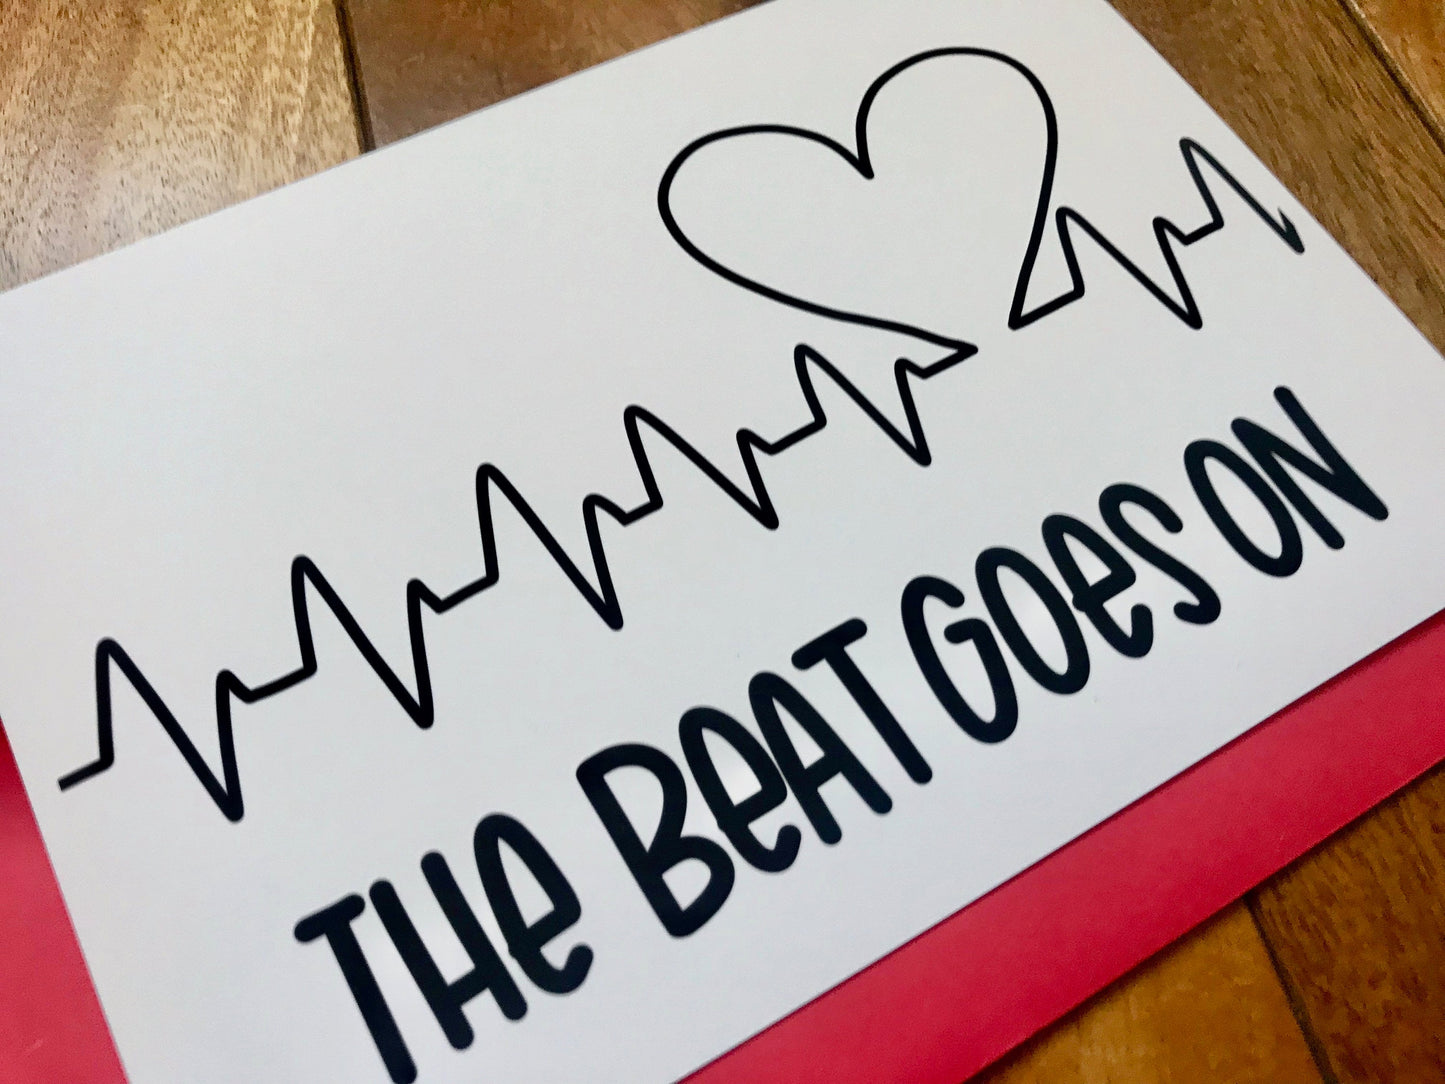 The Beat Goes On Heart Attack Surgery Card by StoneDonut Design